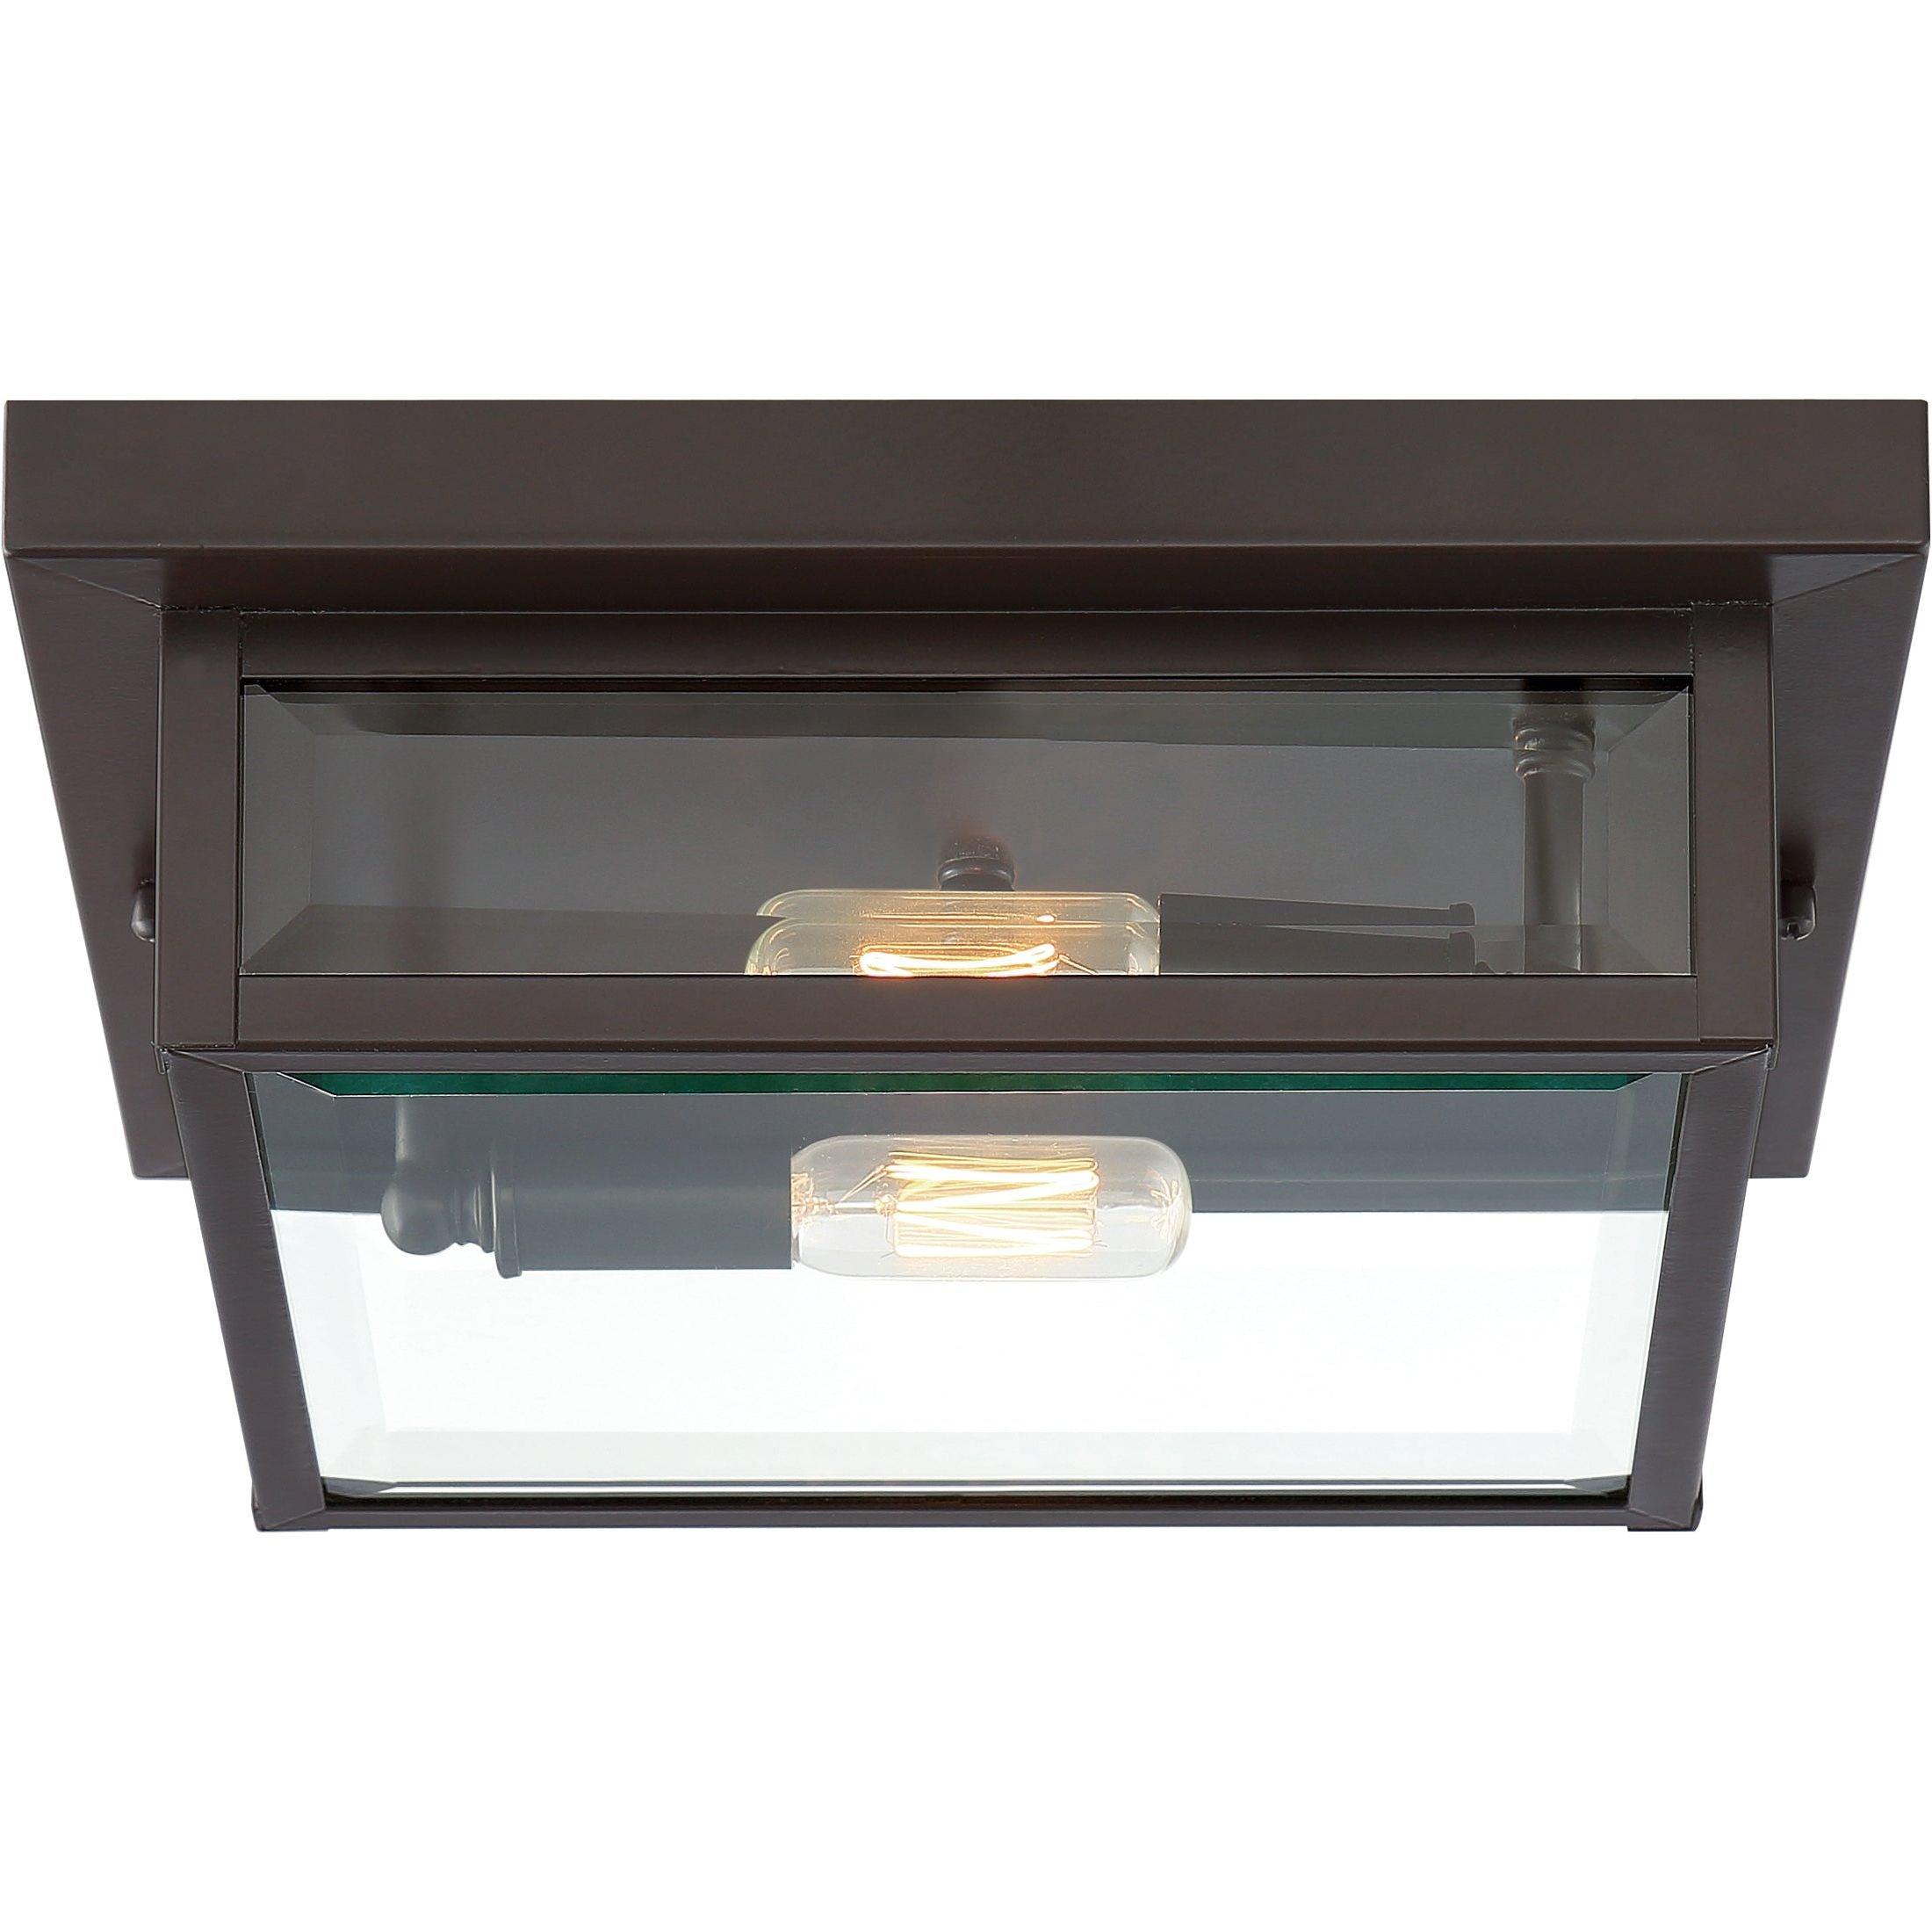 Quoizel - Westover Outdoor Ceiling Light - Lights Canada